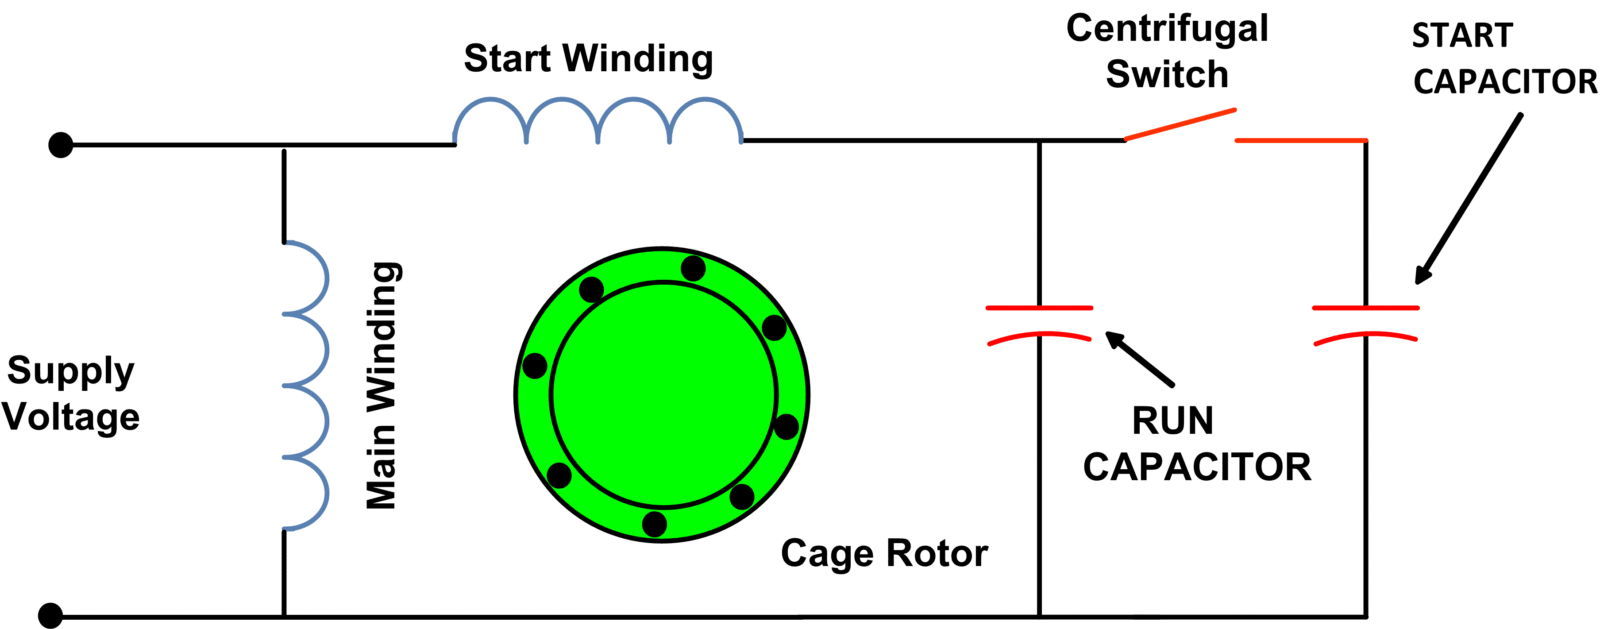 Motor Start Capacitor Wiring Diagram from electricala2z.com